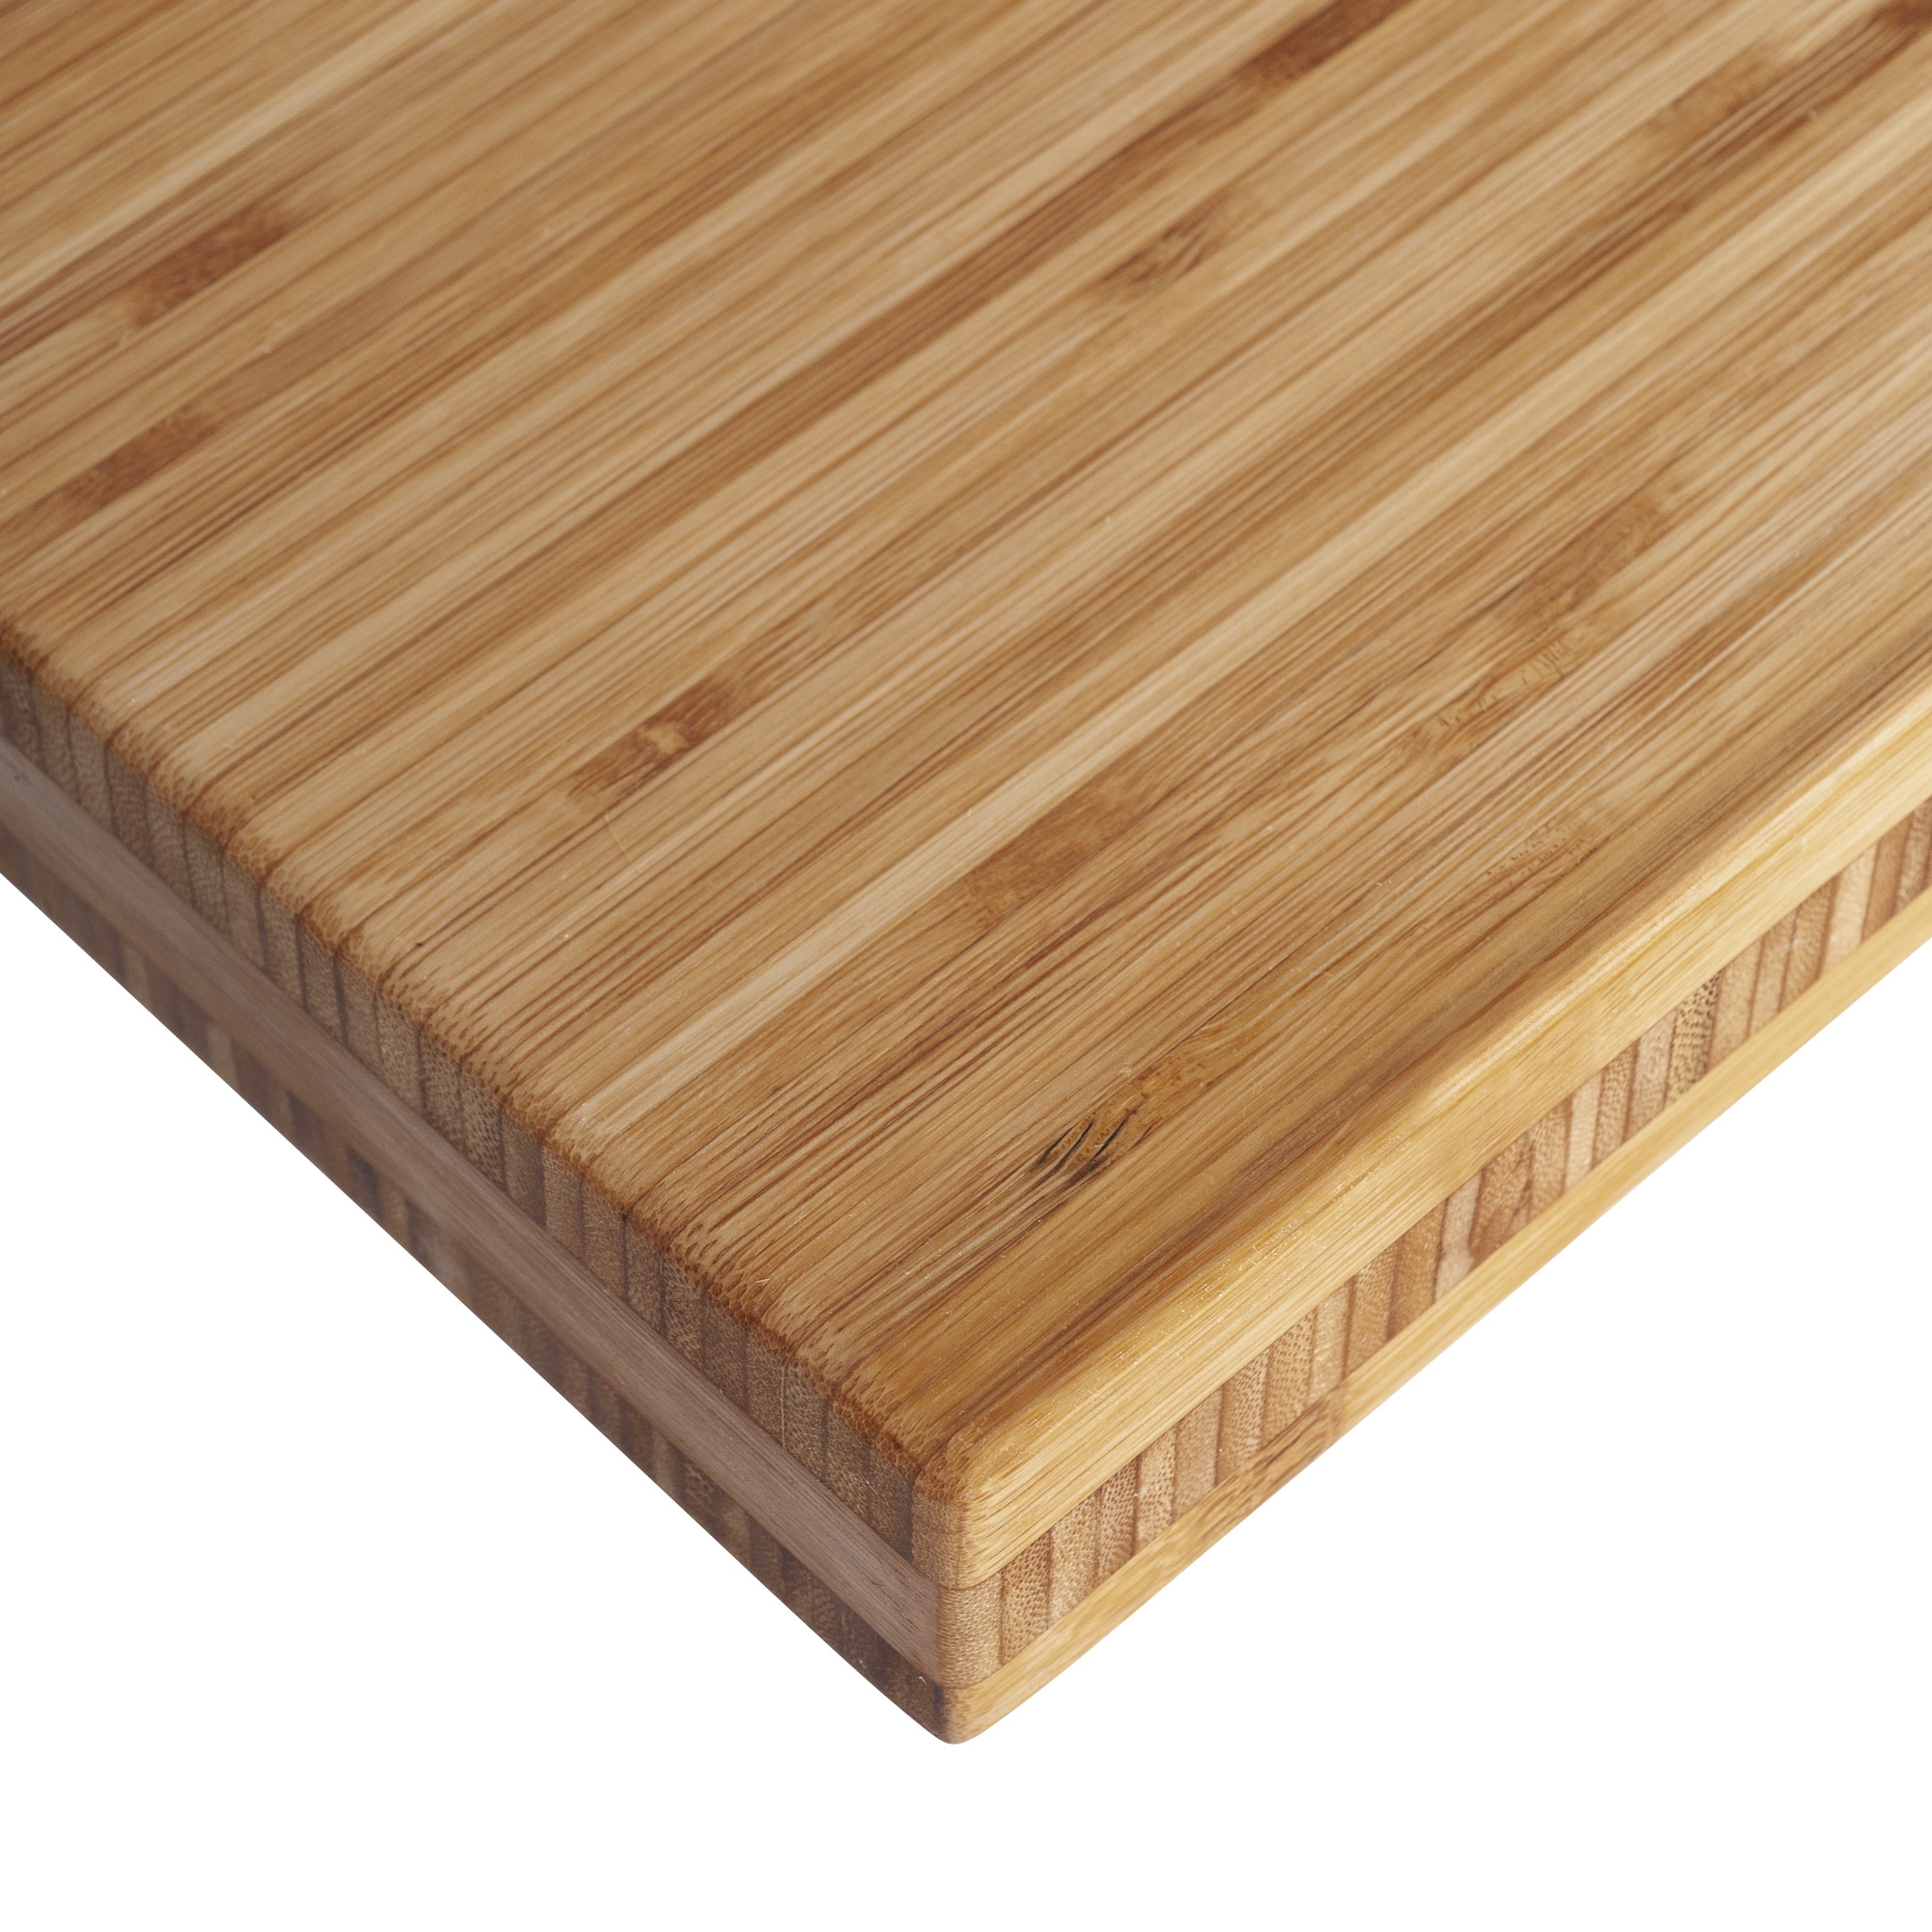 Sparrow Peak Bamboo Vertical Grain 120-in x 25-in x 1.75-in Unfinished  Natural Straight Bamboo Butcher Block Countertop at